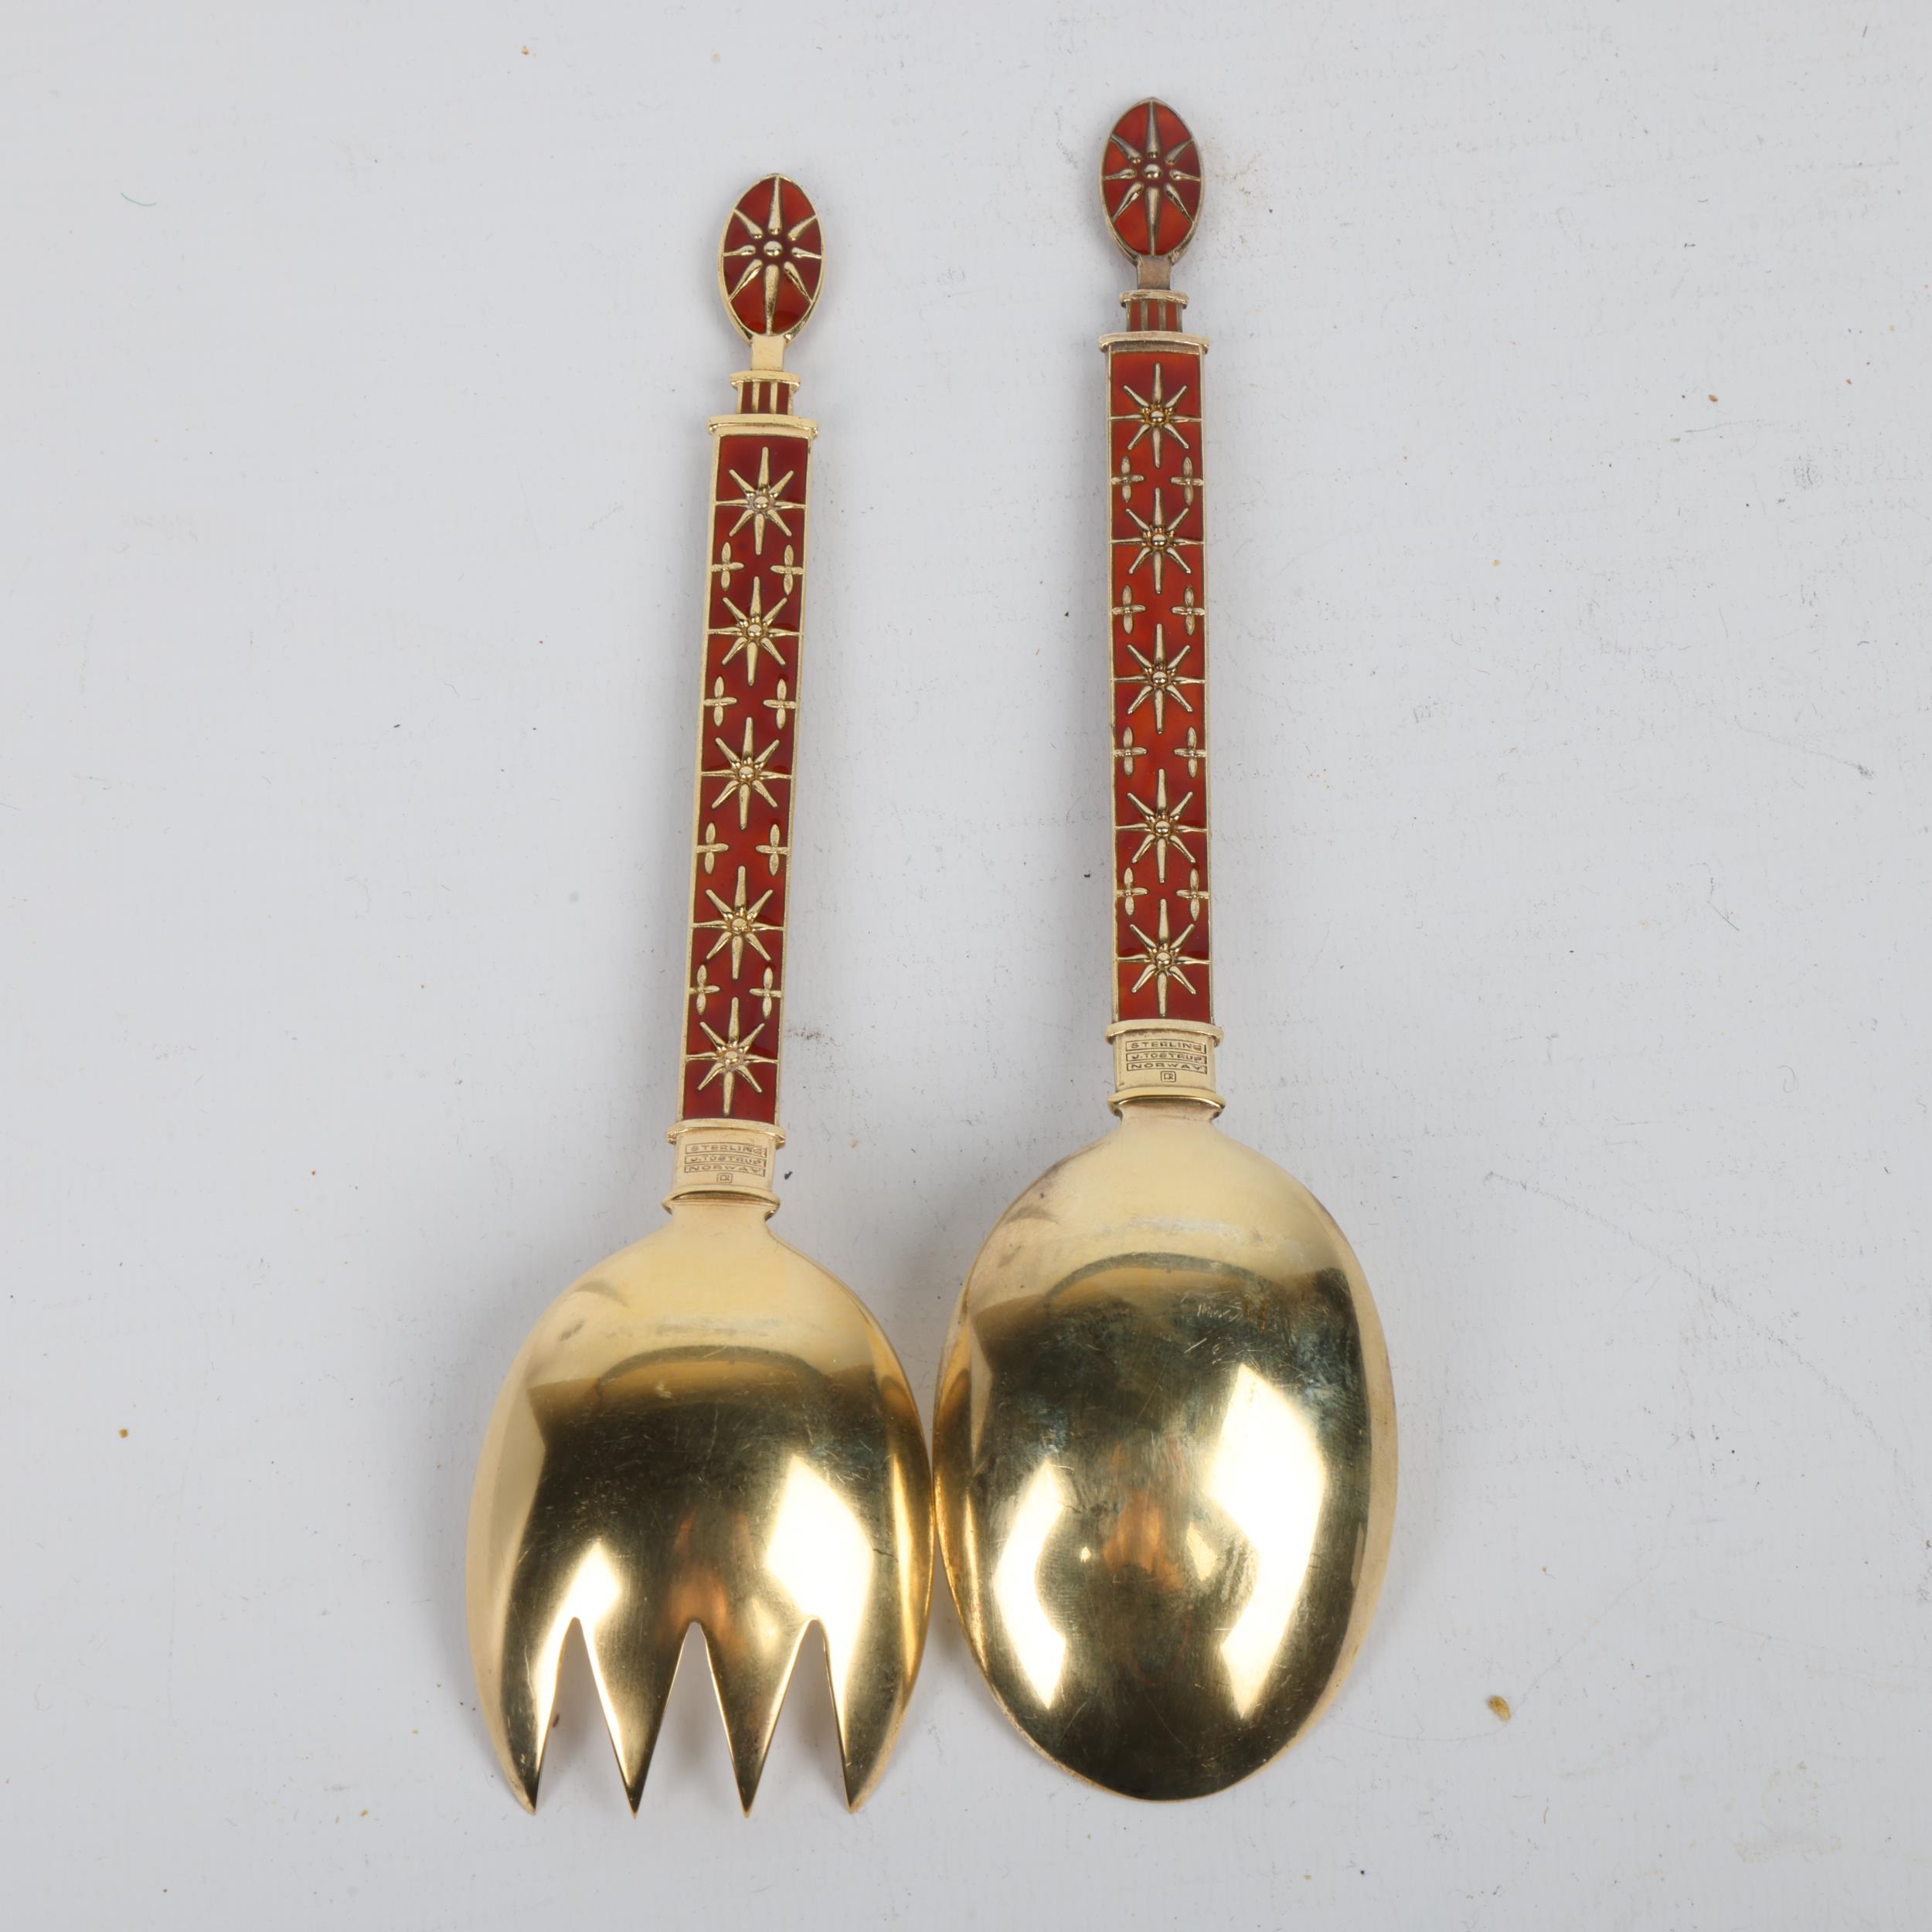 J TOSTRUP - a pair of Norwegian modernist sterling silver-gilt red enamel servers, Oslo circa - Image 2 of 3